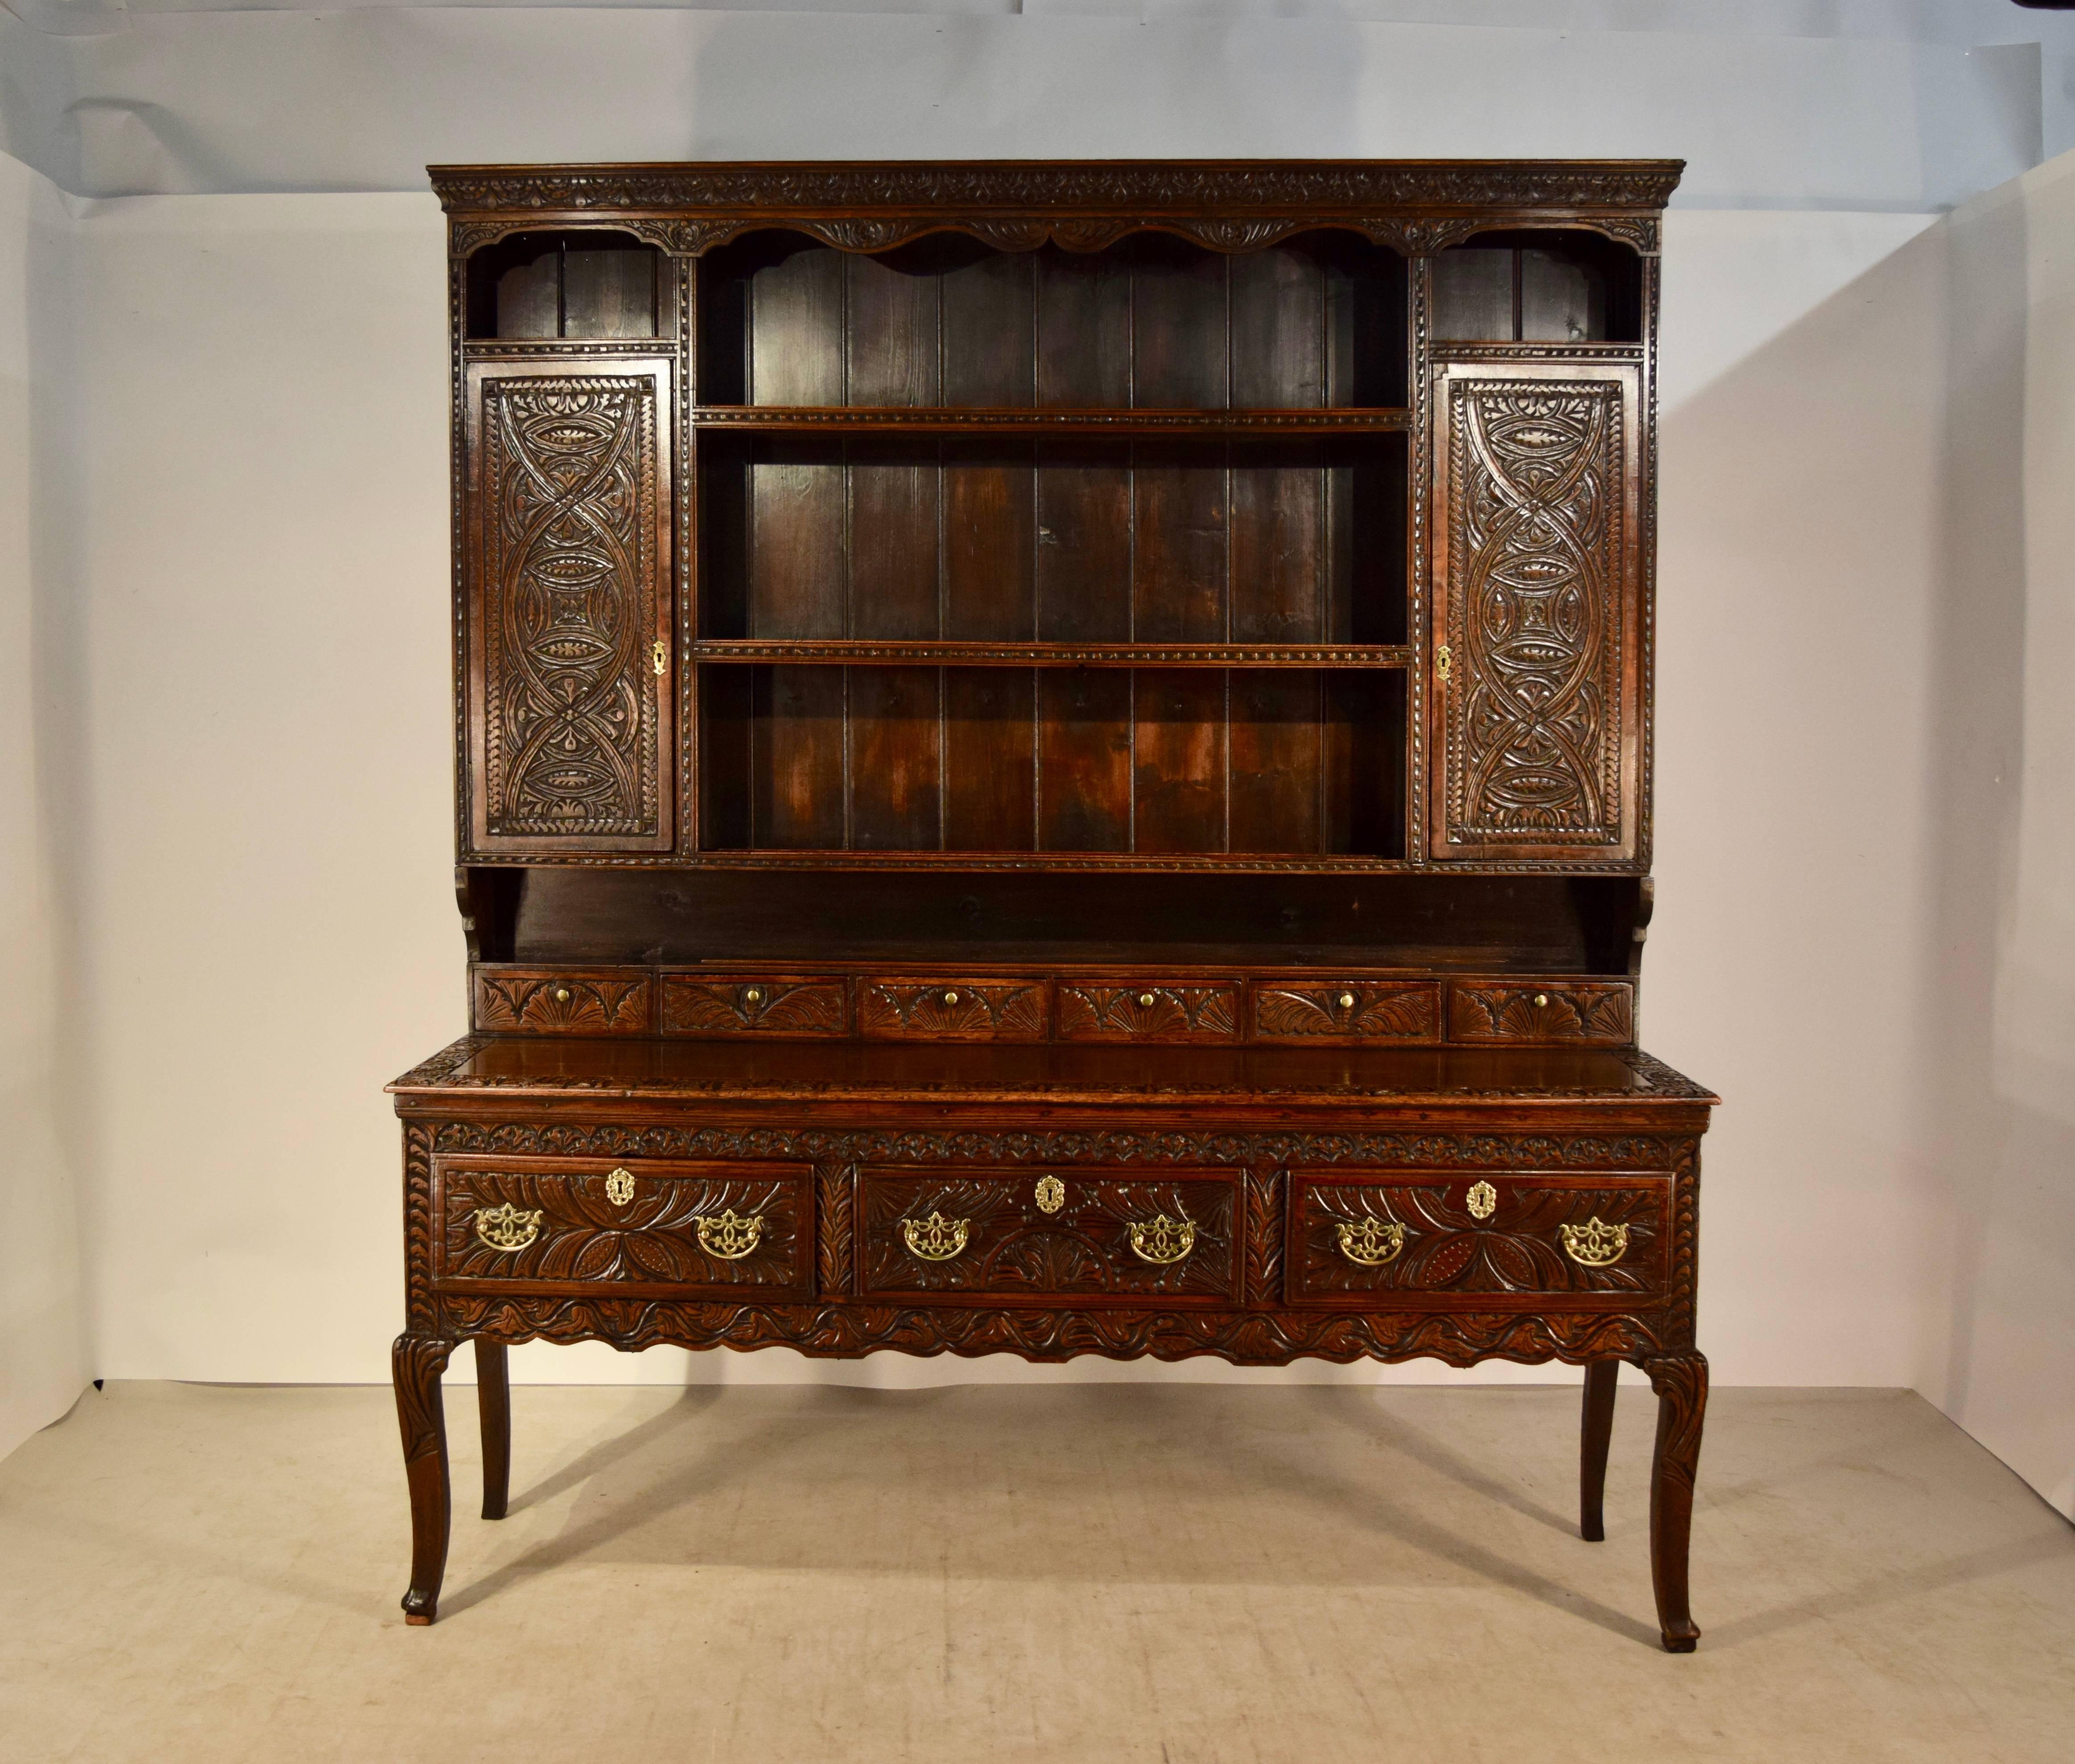 18th century oak dresser from Wales. The crown is carved decorated and has a scalloped apron over the top of the cupboard, which has small shelves over hand-carved doors, which are flanking a central set of three shelves, all with carved shelf